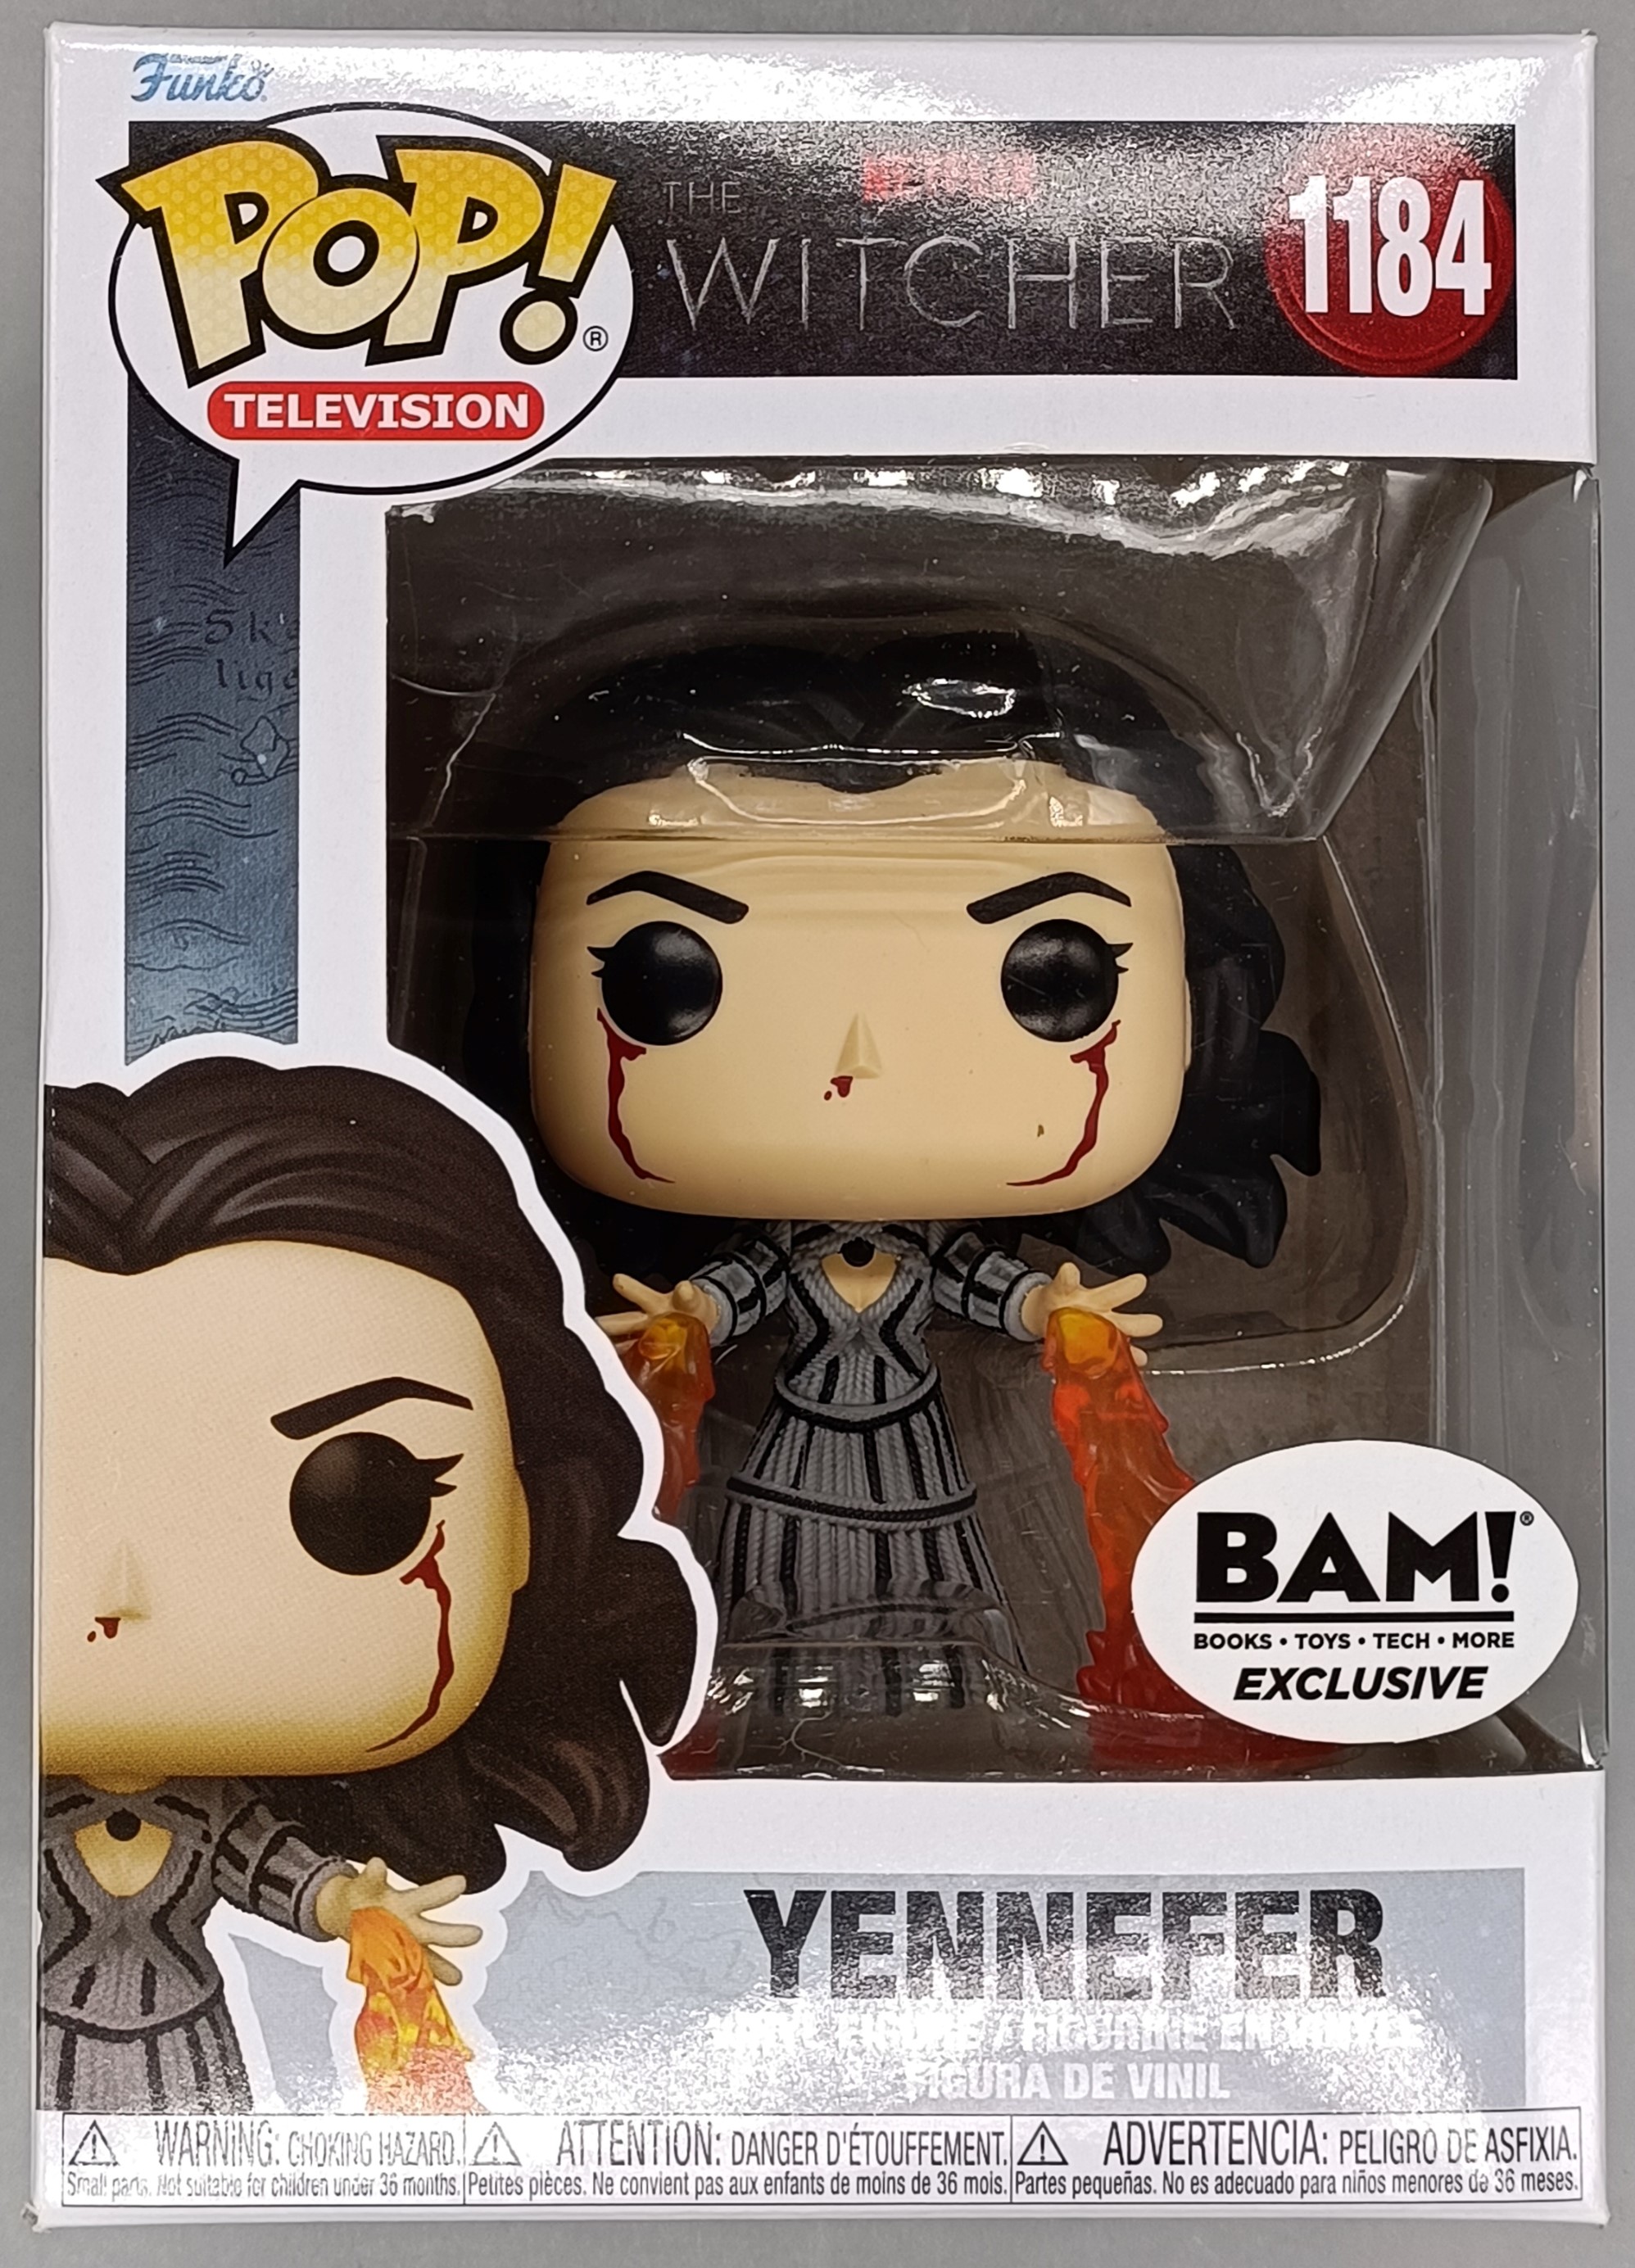 Funko Pop! Television Netflix The Witcher Yennefer BAM! Exclusive